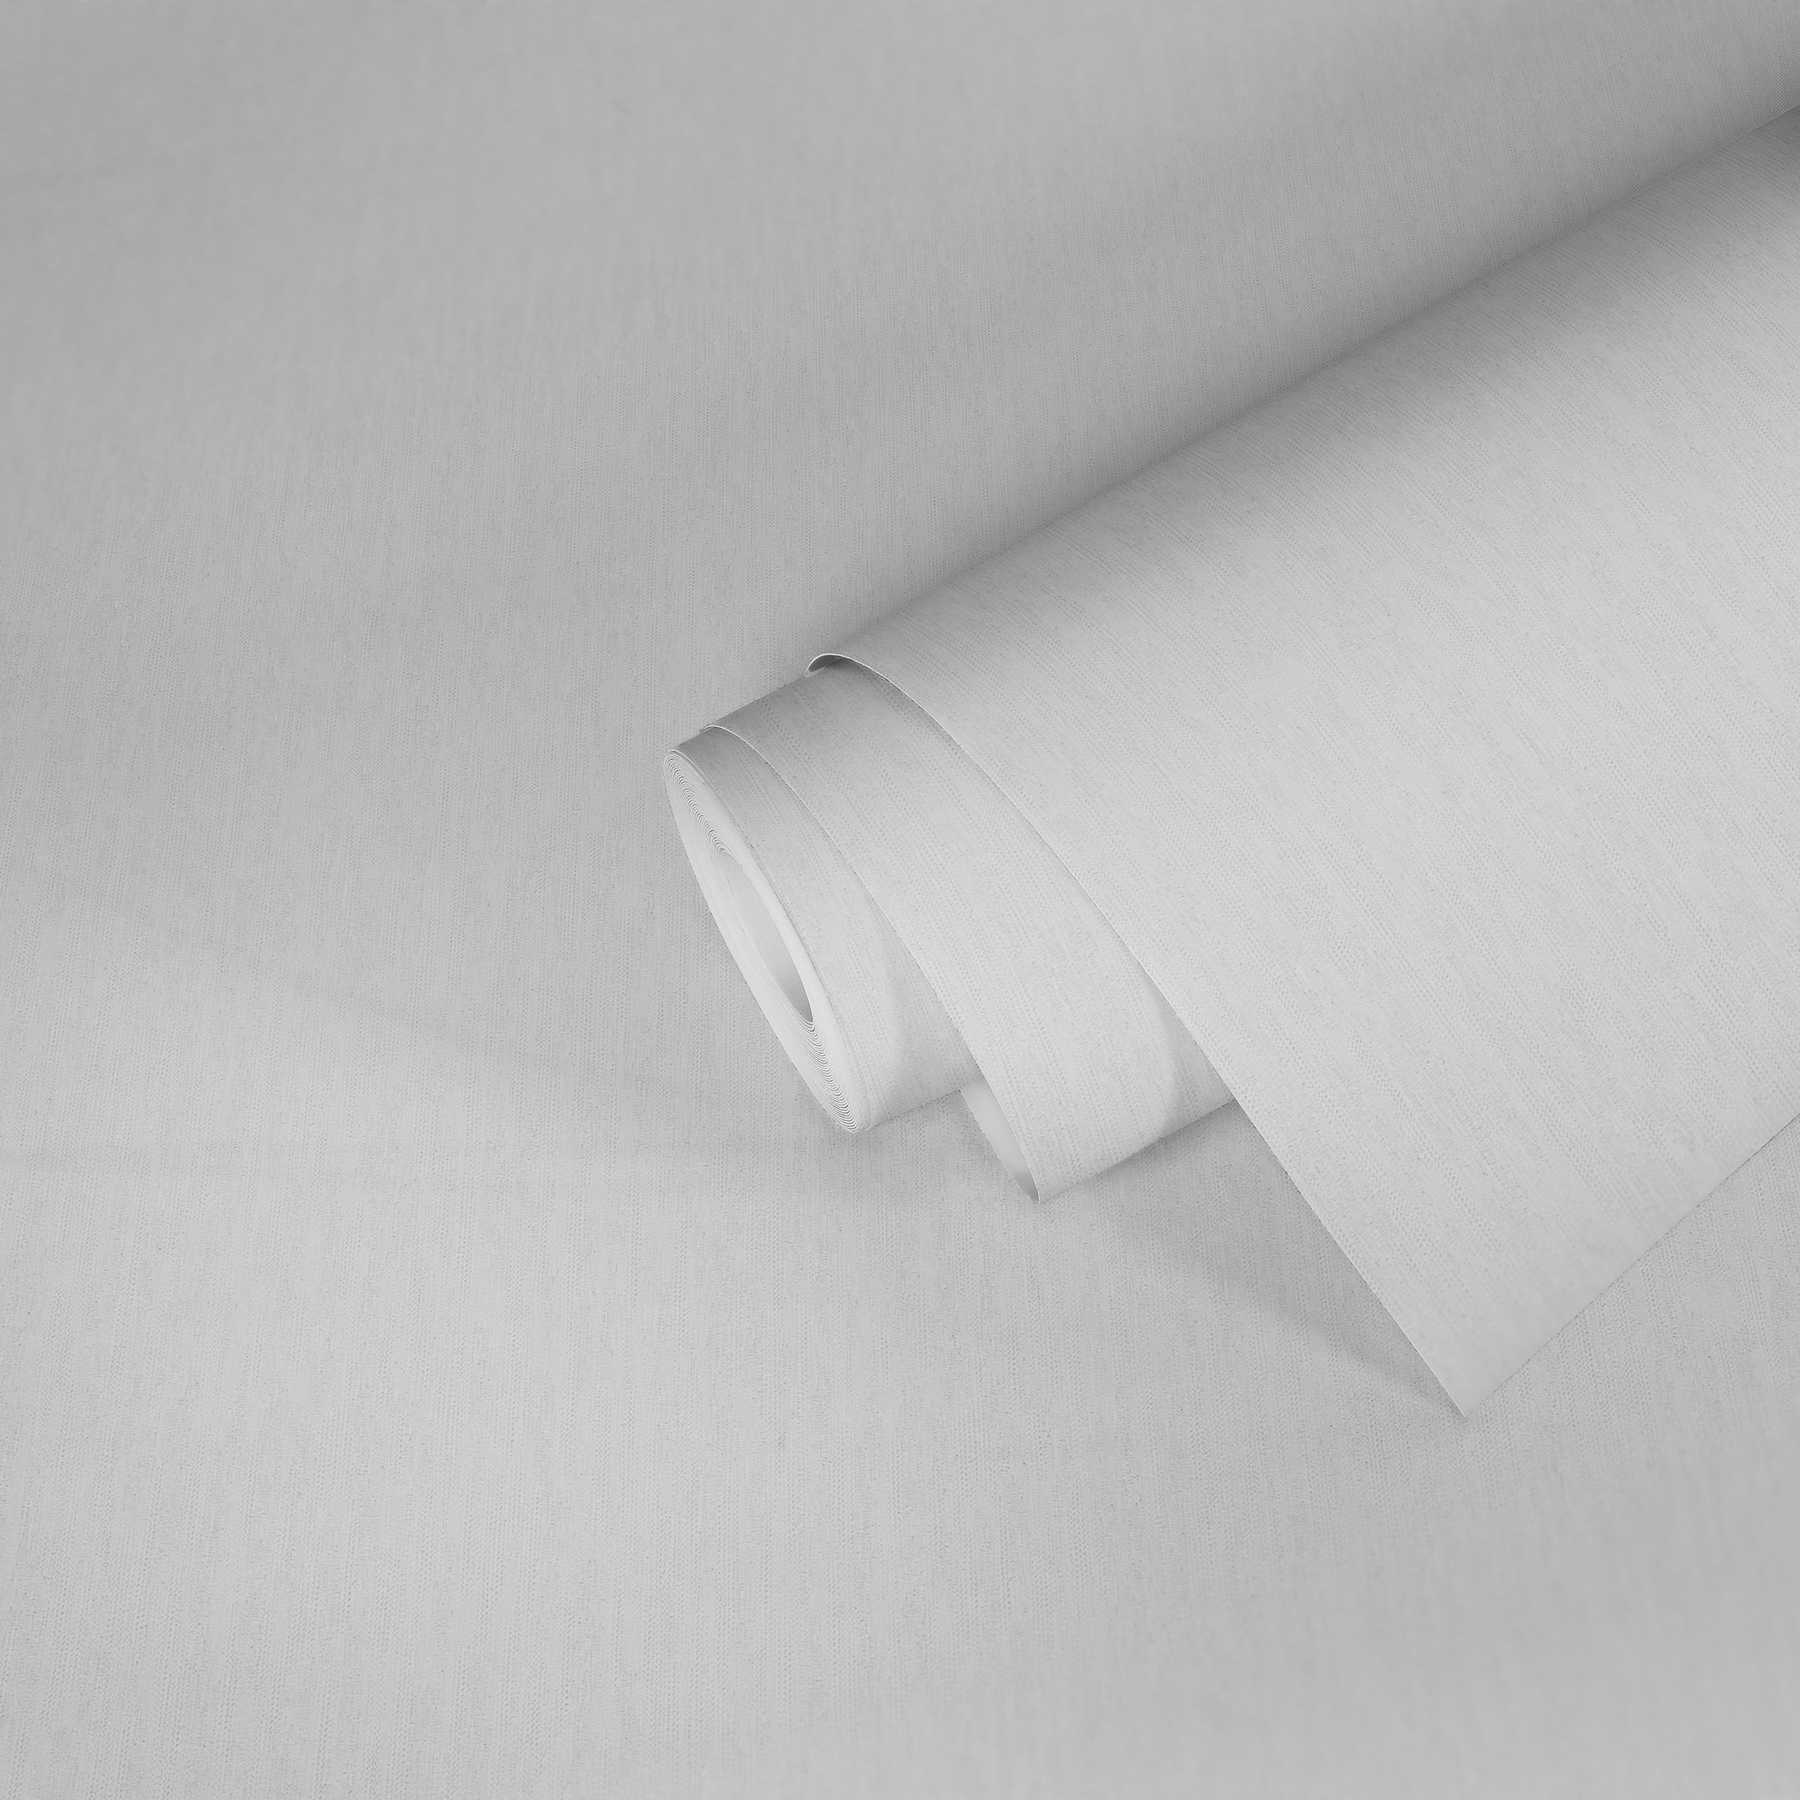             Non-woven wallpaper with fine textured pattern paintable - white
        